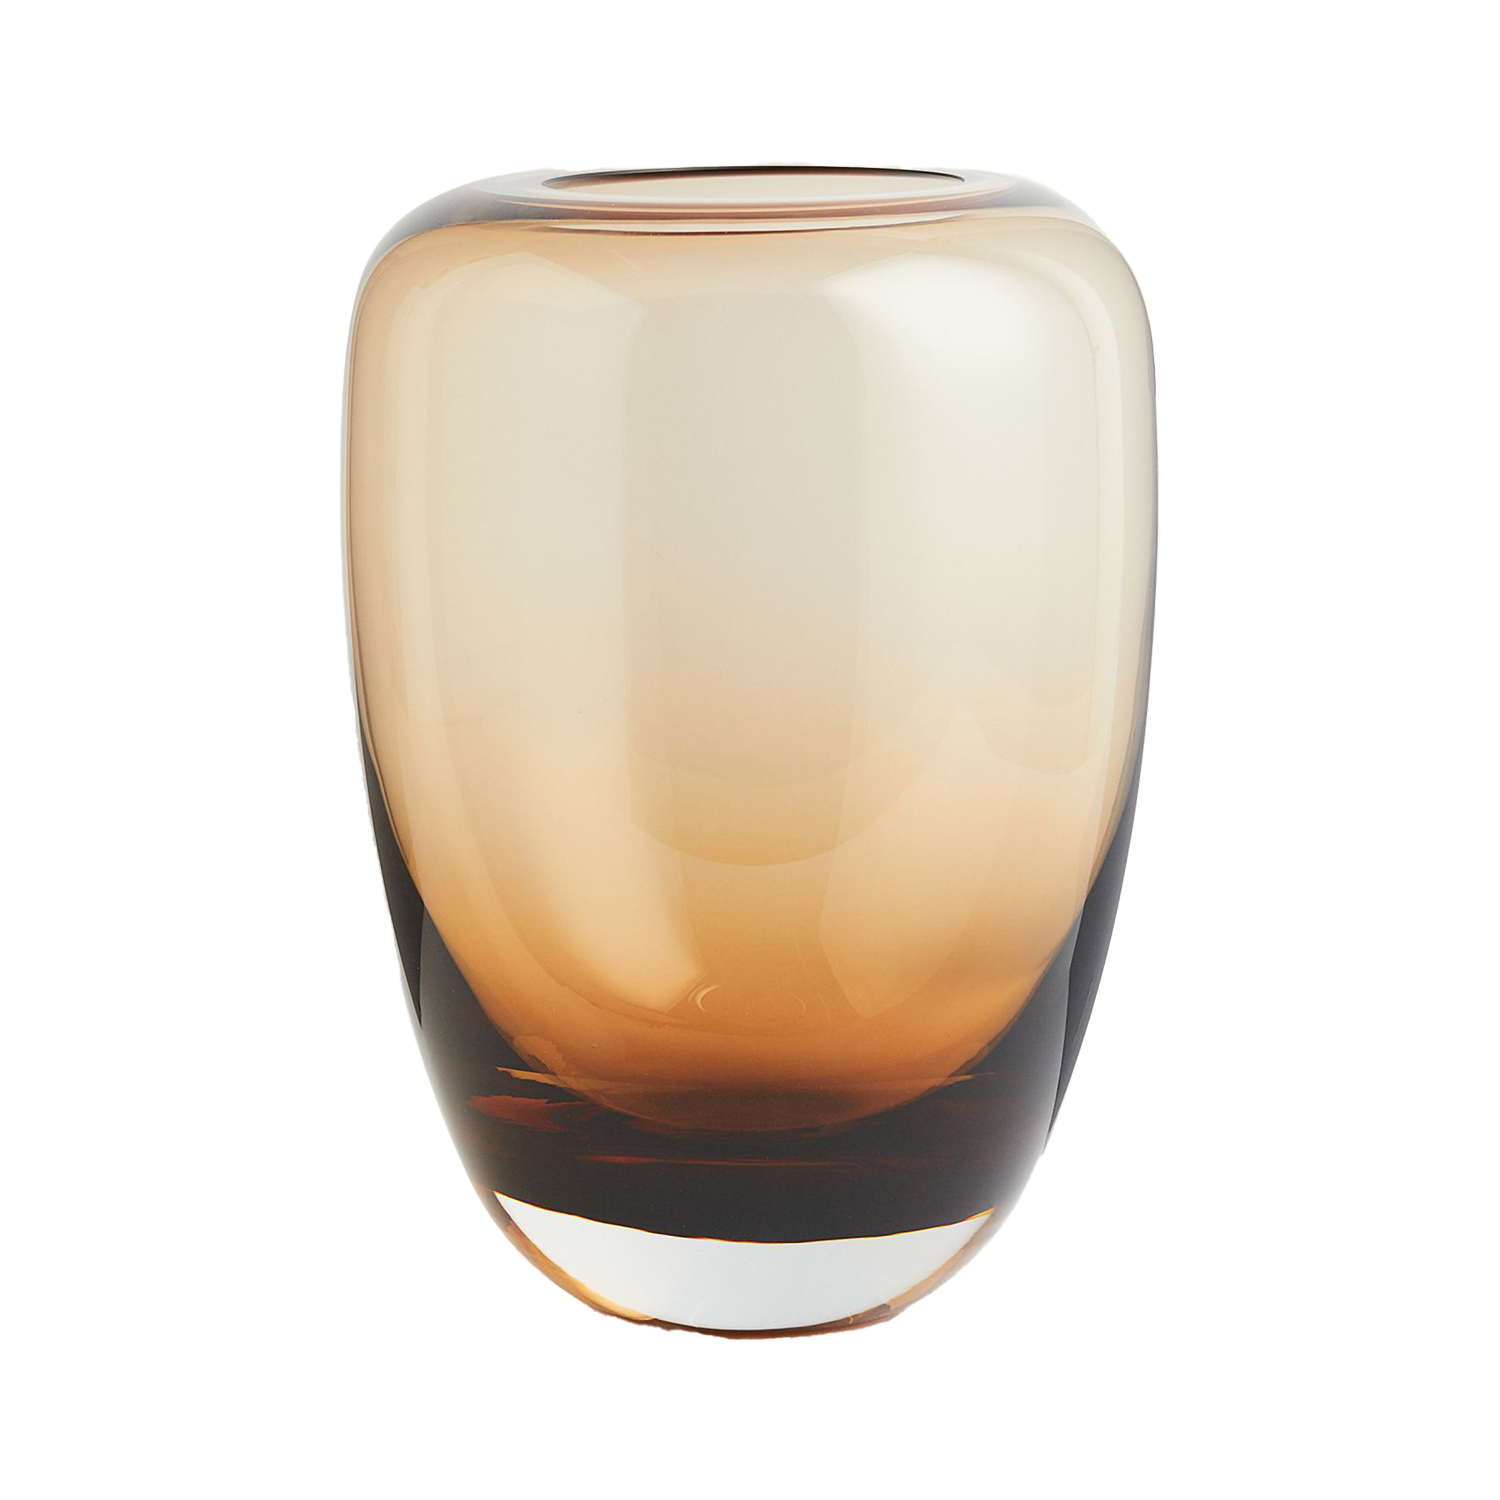 H&M Home Large Glass Vase in Amber.